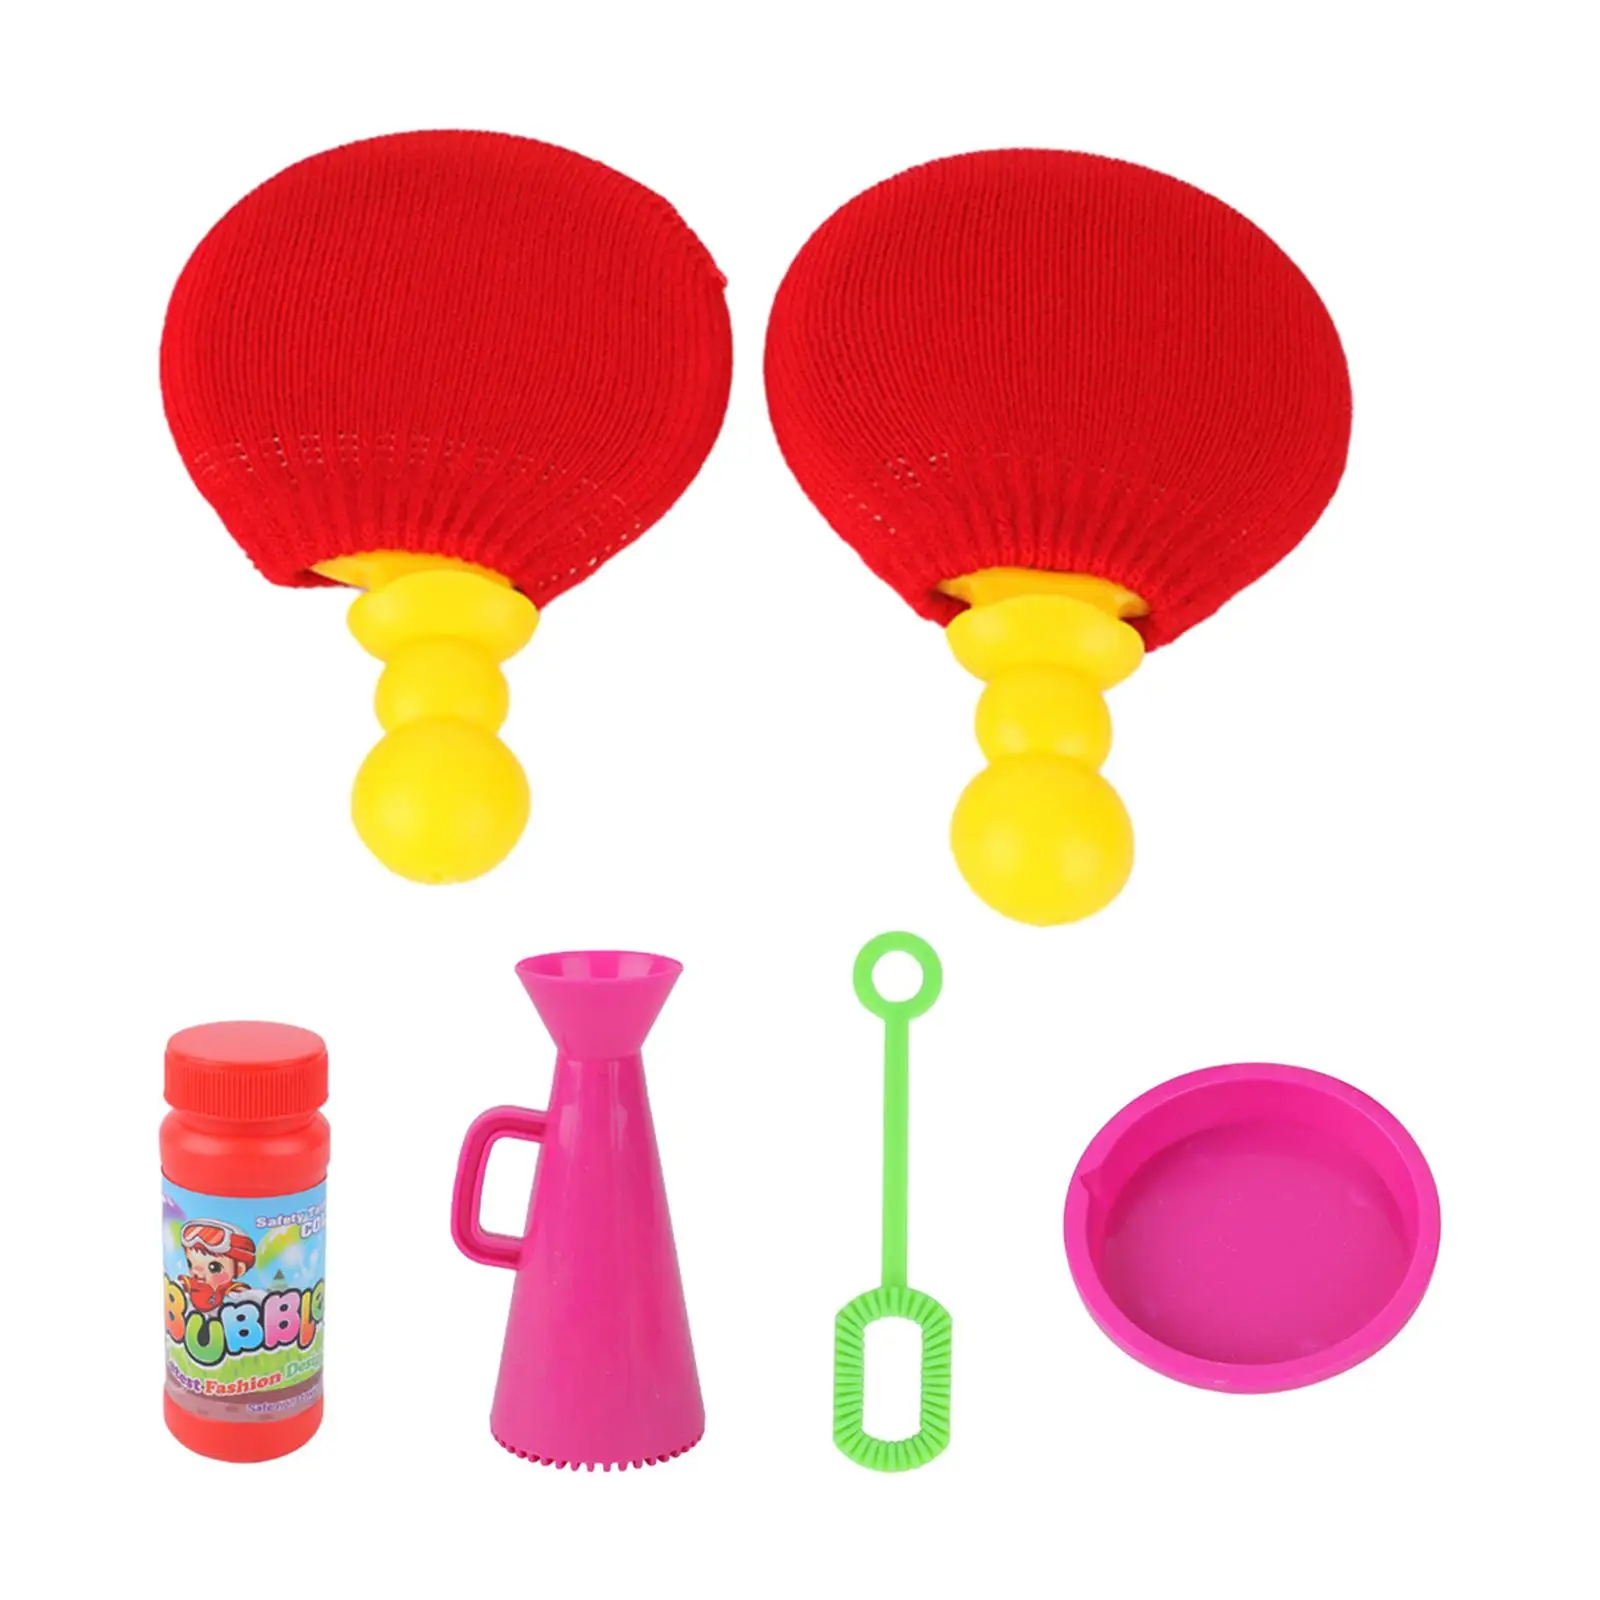 Ping Pong Game with Soap Bubble Indoor and Play Unpoppable Bubbles Solution Toy for Kids Children Girls Boys Great Gift